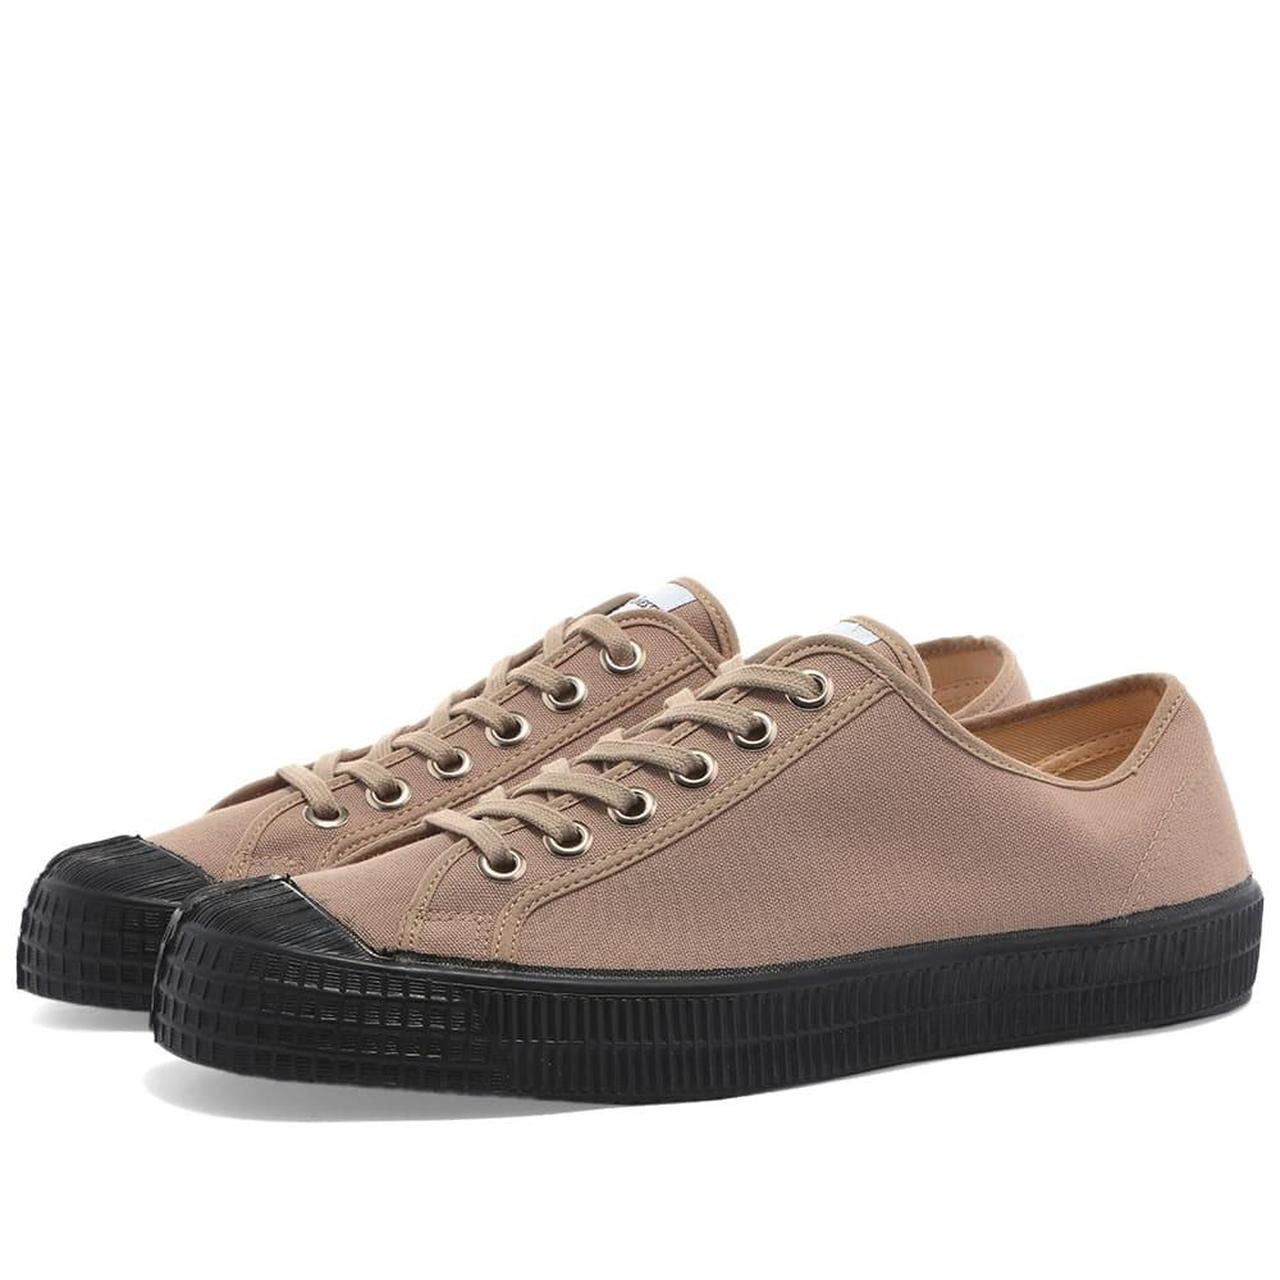 Novesta Women's Brown and Black Trainers (3)